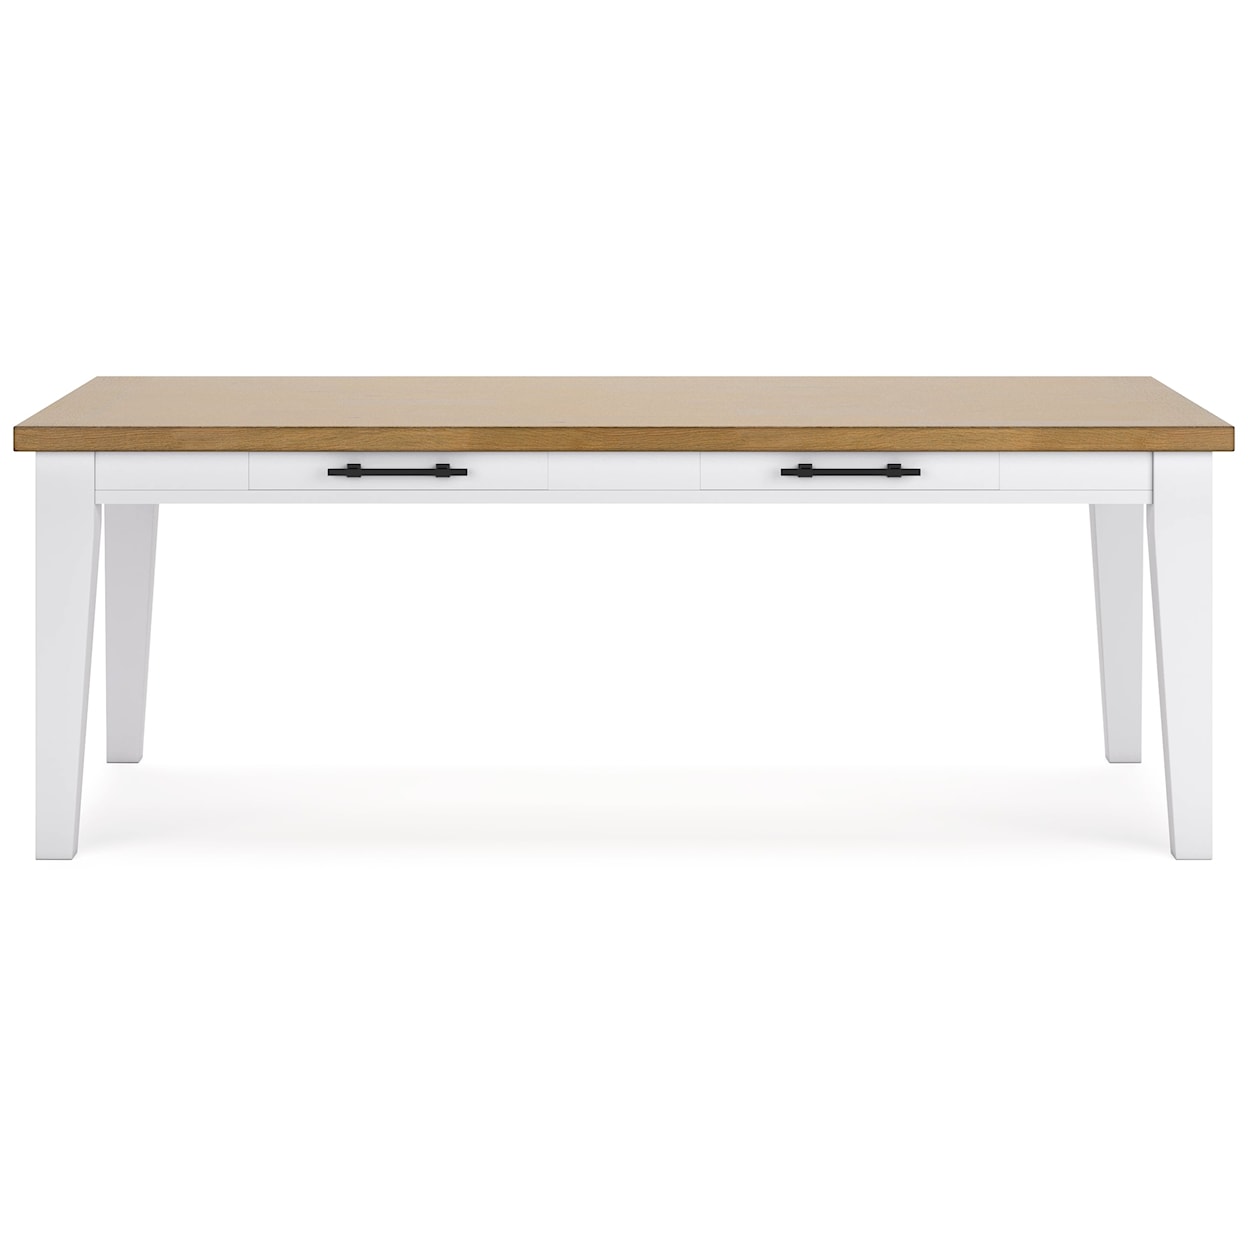 Signature Design by Ashley Furniture Ashbryn Rectangular Dining Room Table